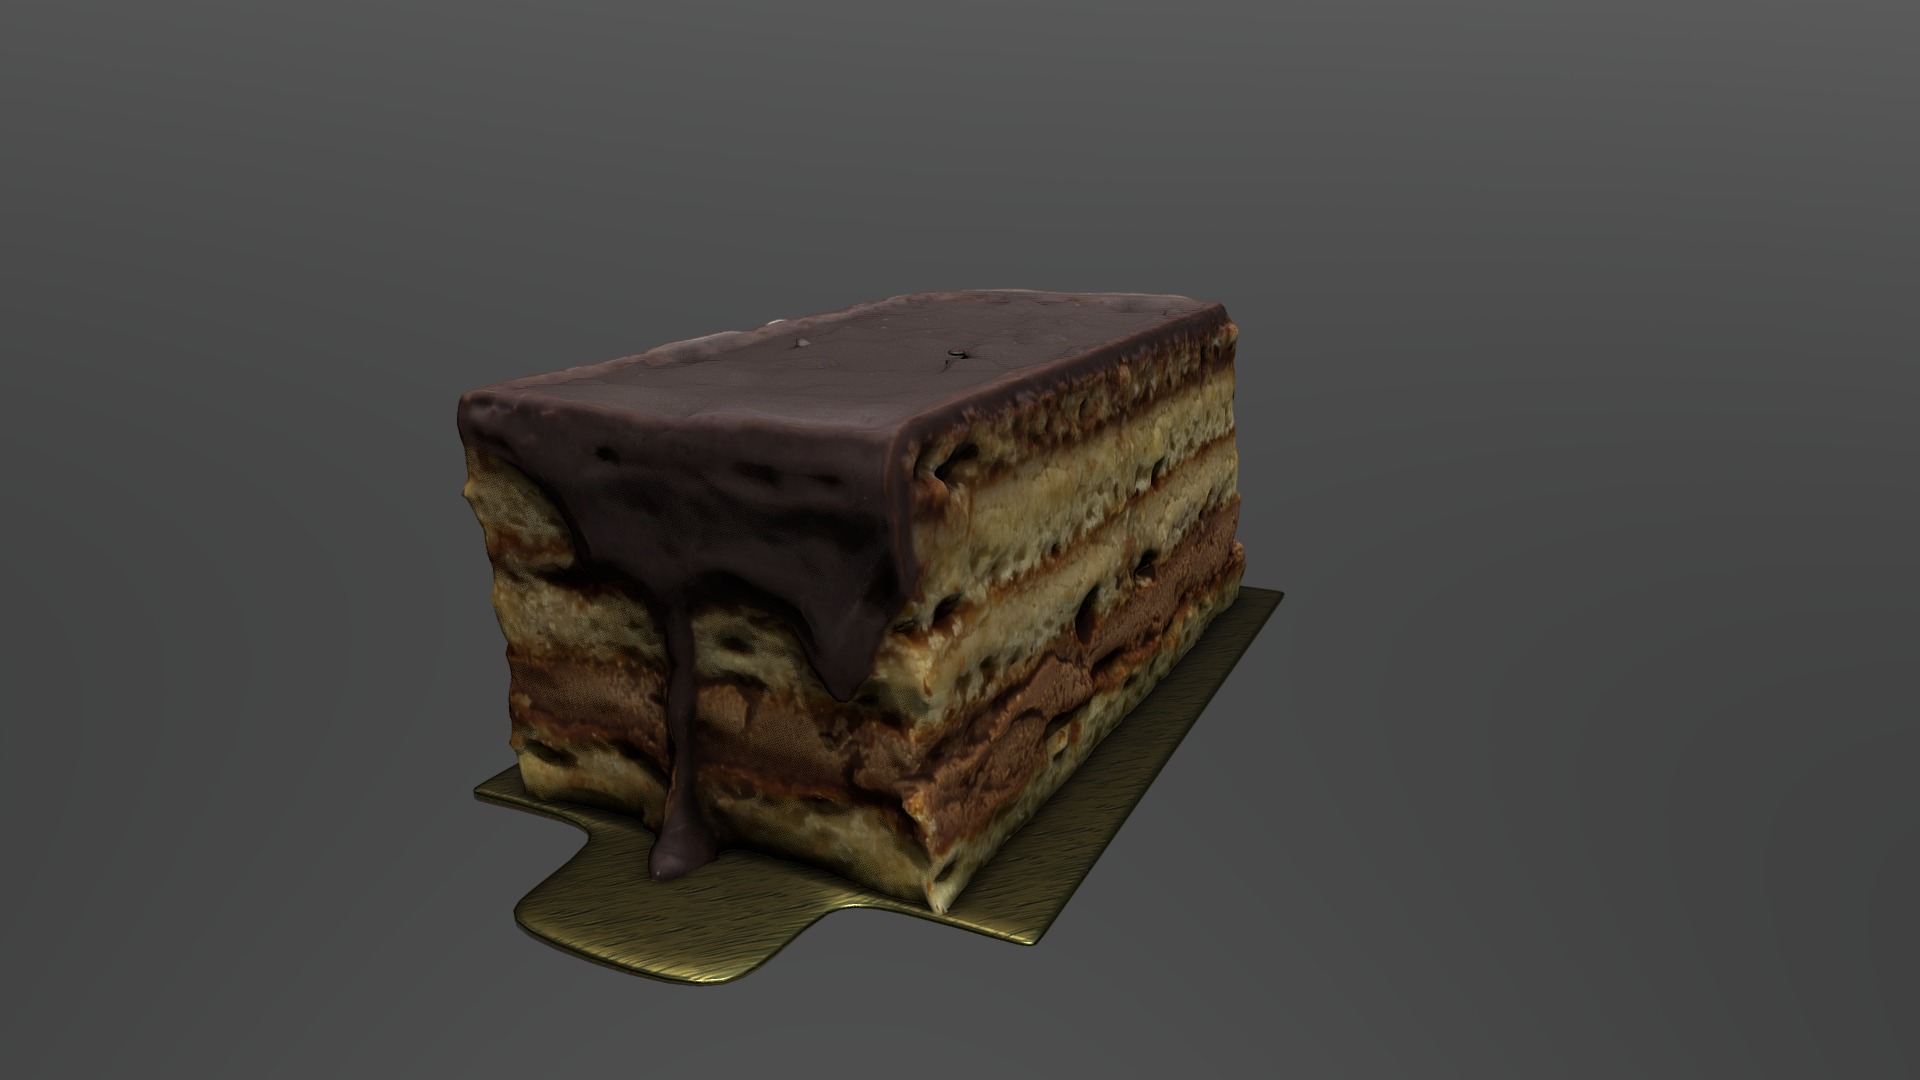 3D model 14PIG - This is a 3D model of the 14PIG. The 3D model is about a slice of chocolate cake.